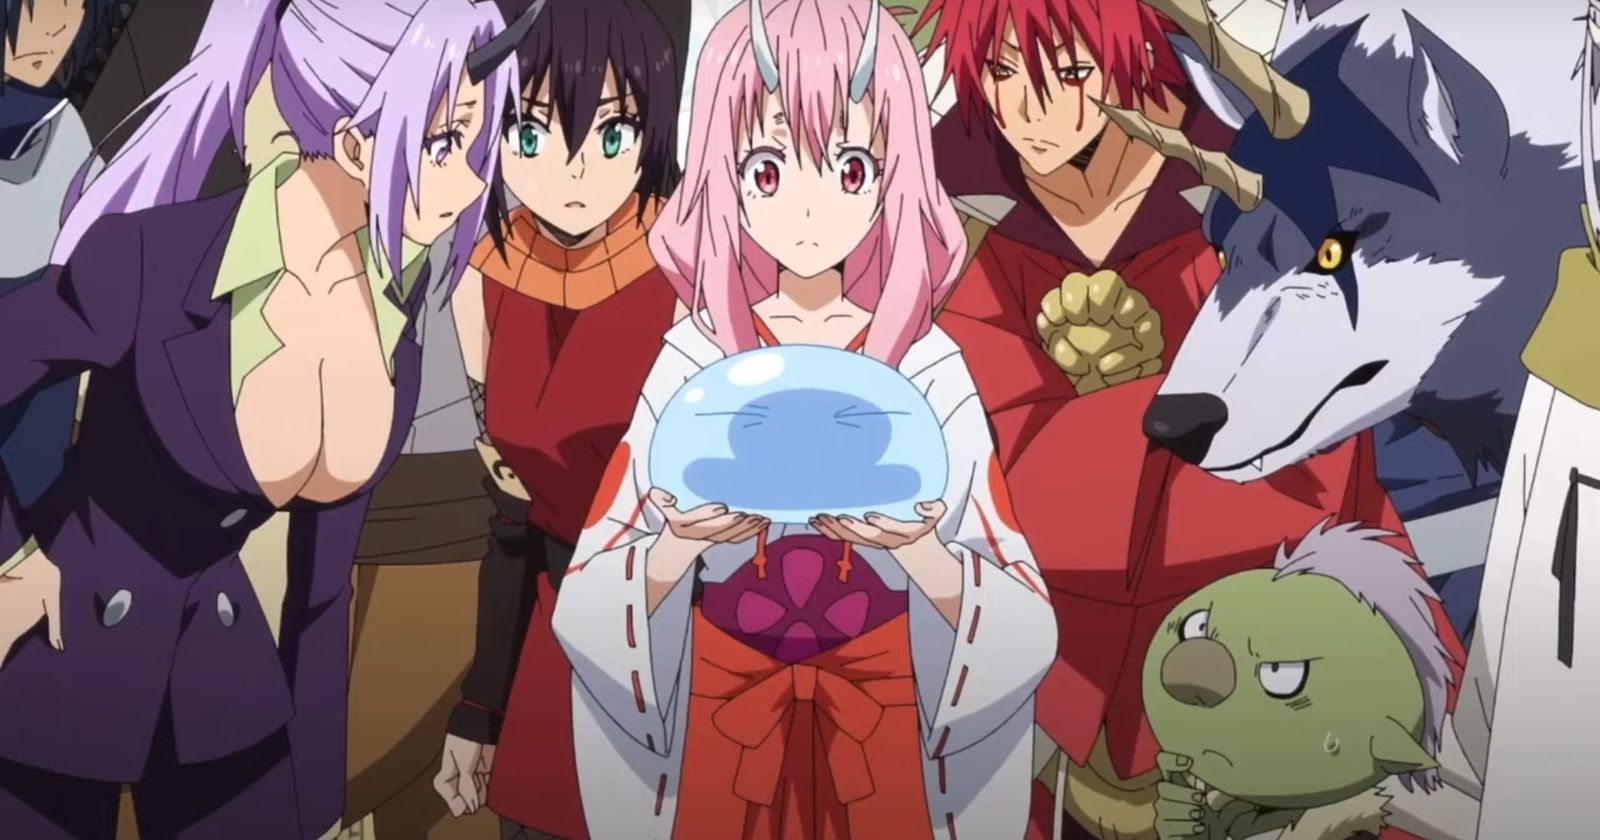 Characters appearing in That Time I Got Reincarnated as a Slime